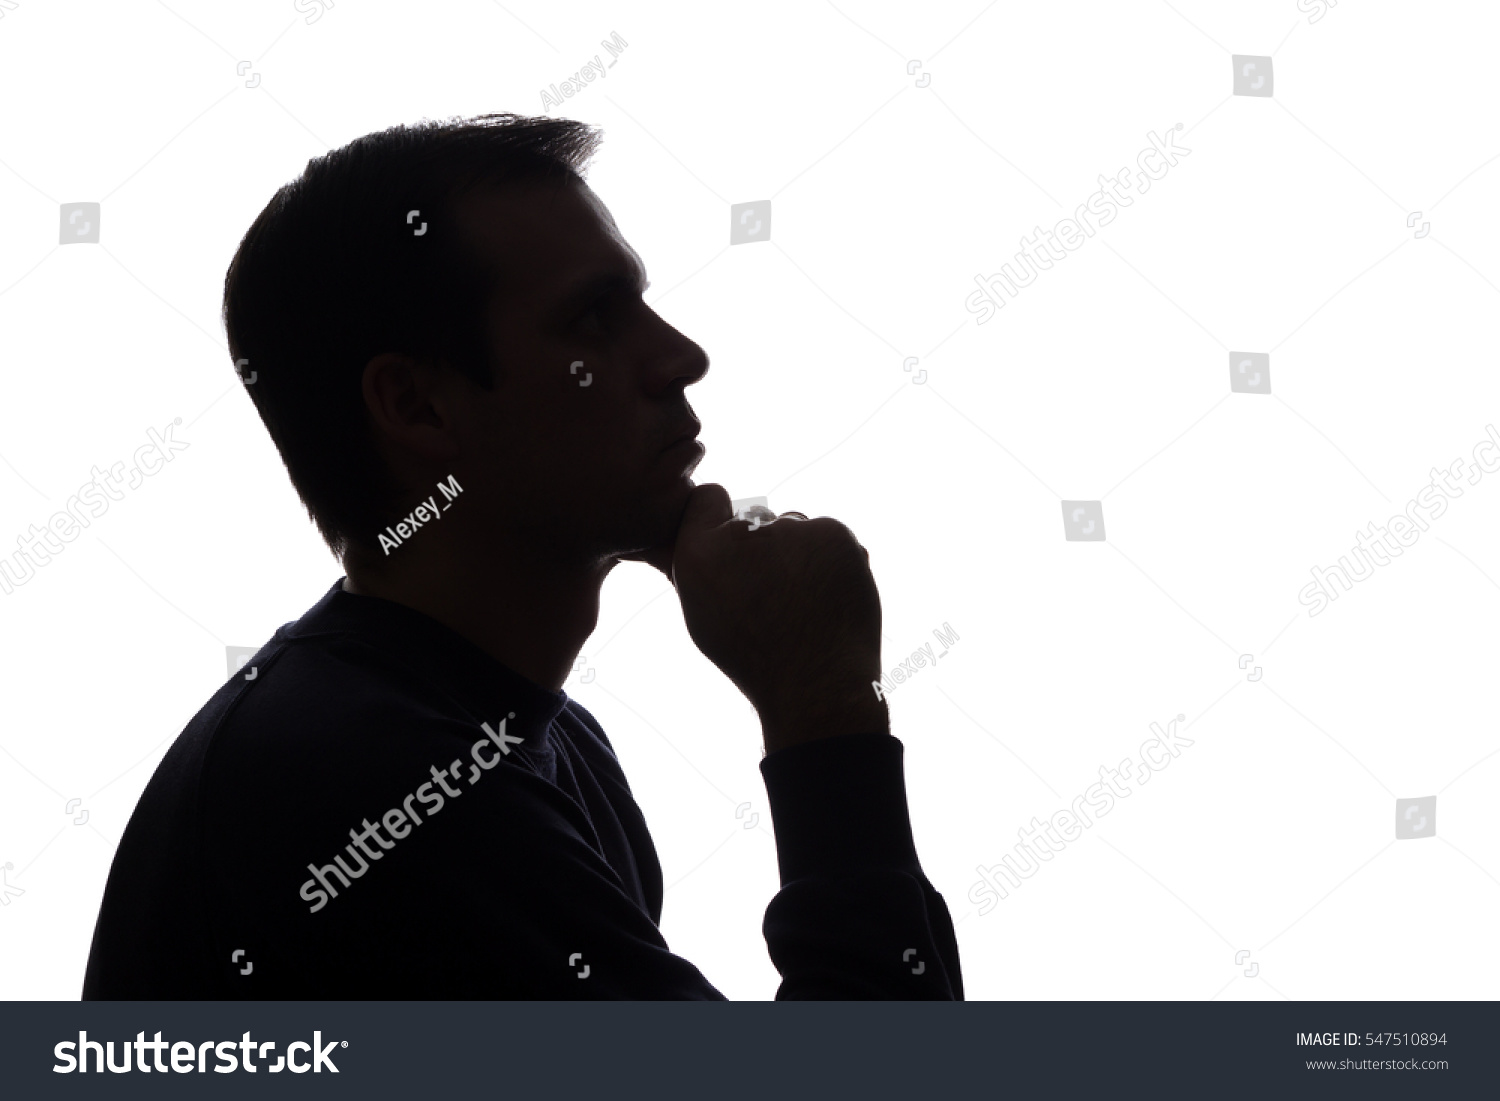 The young man thought his head propped on his hand - silhouette #547510894